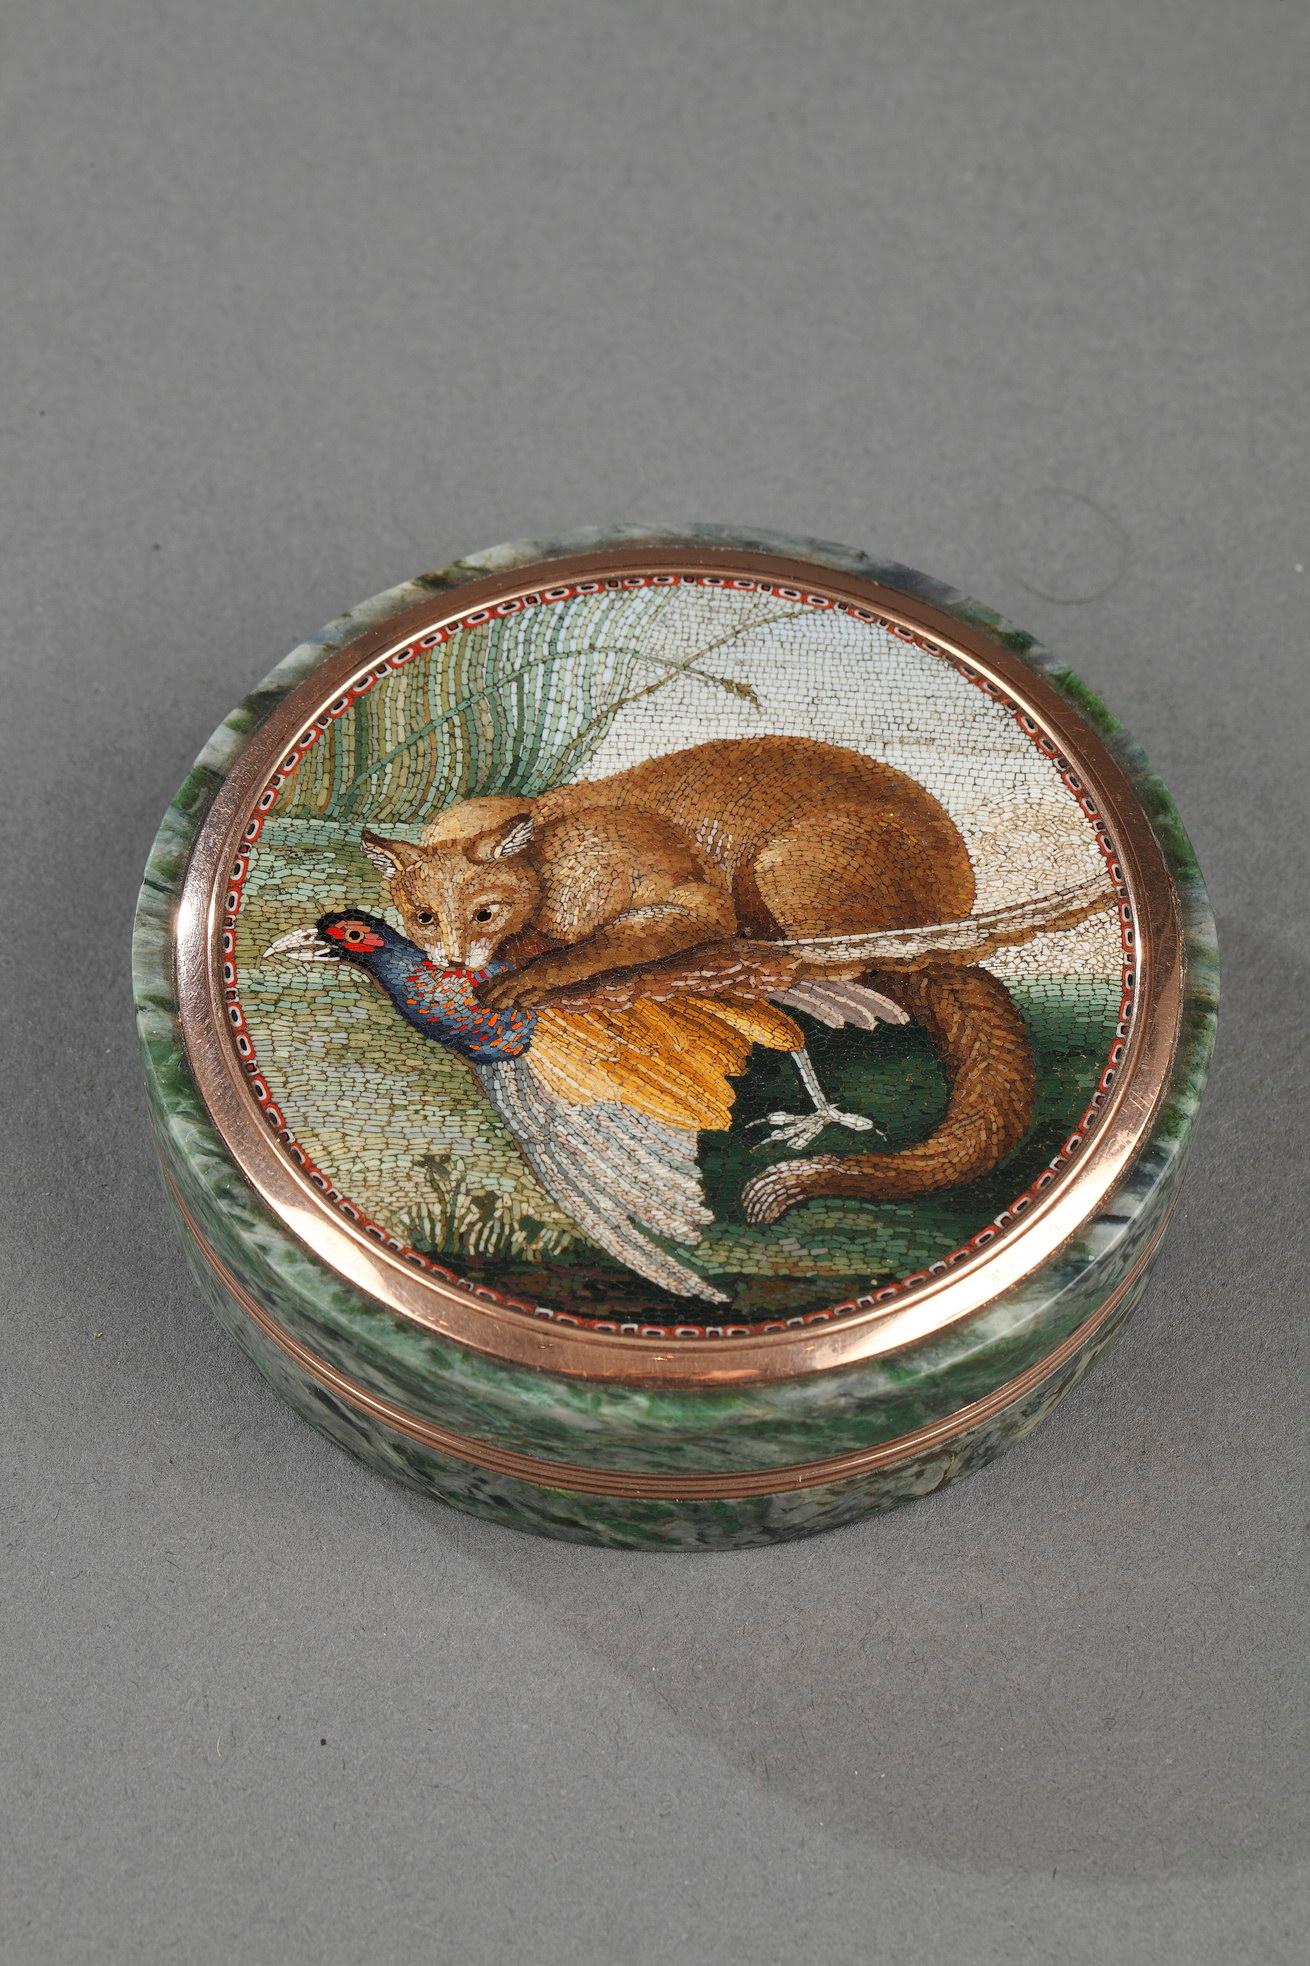 Round box made in hardstone (green porphyry). The removable lid is decorated with a circular micromosaic of exceptional quality. It features a fox attacking a pheasant. The fox near a clump of reeds, is crouched, ears back, and remains wary of his